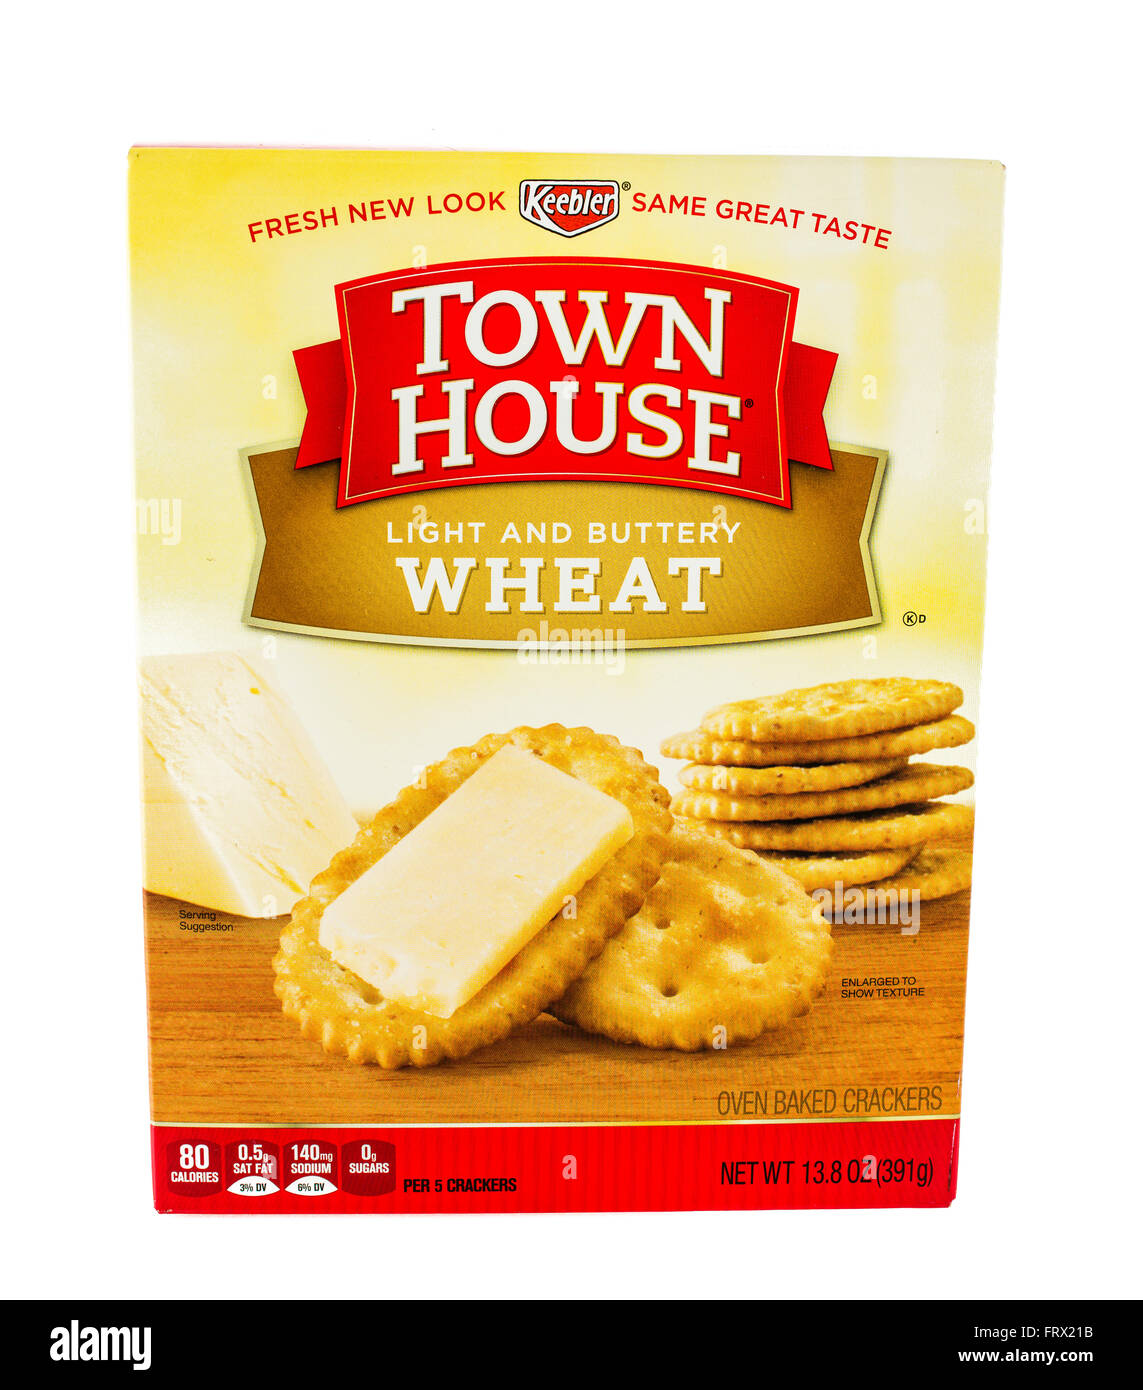 Winneconne, WI - 5 February 2015: Town House Light and Buttery Wheat crackers made by Keebler. Stock Photo